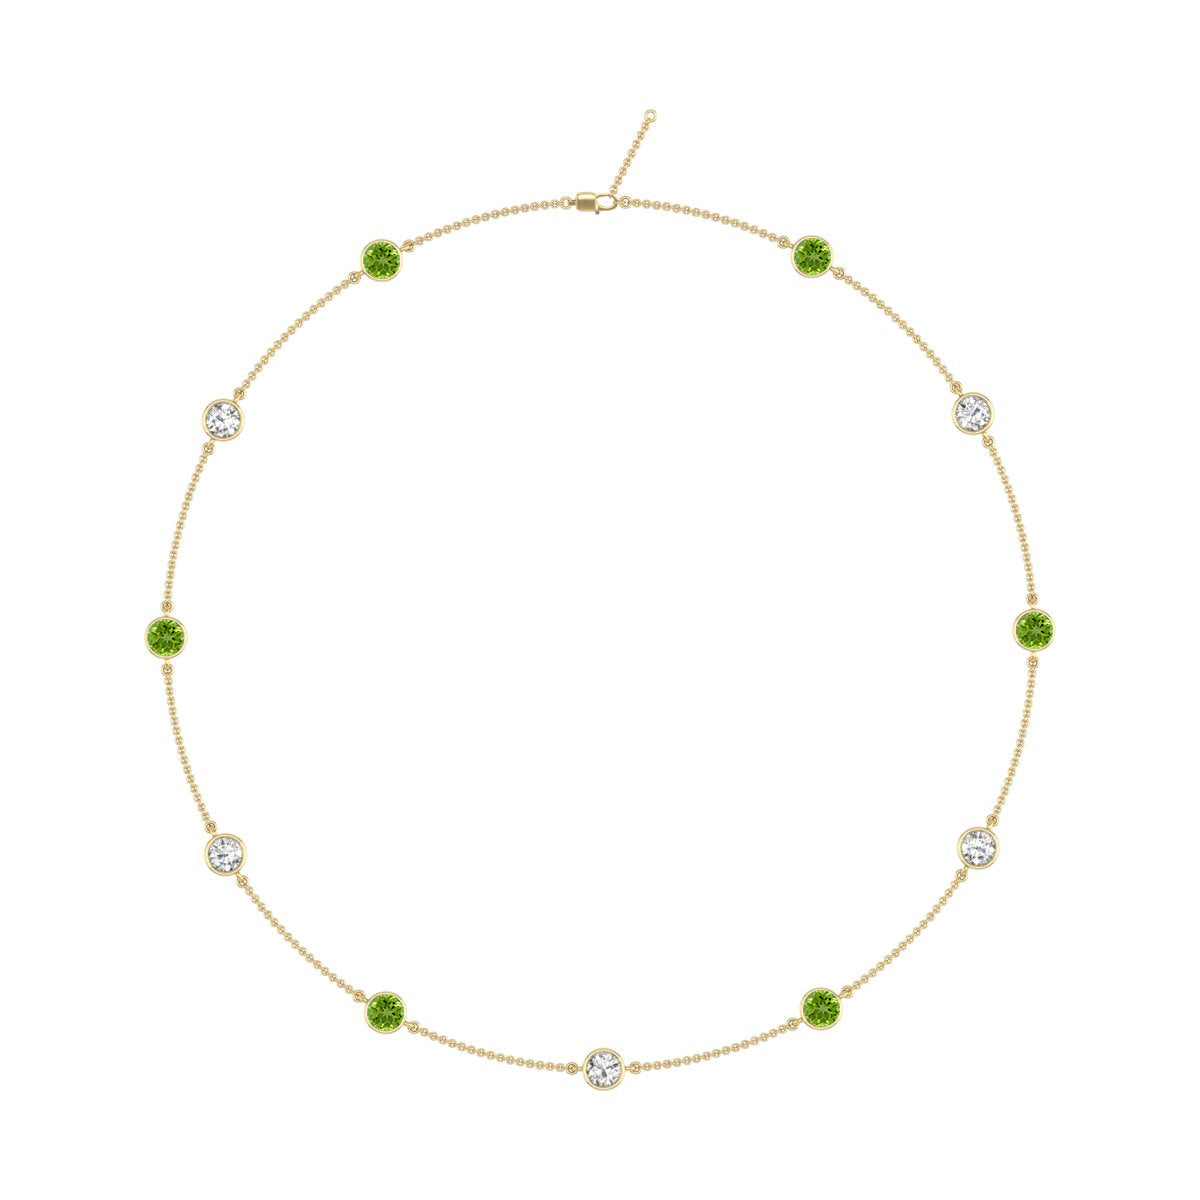 1CT TW Round Diamond and Peridot Gemstone Necklace in 14k White & Yellow Gold